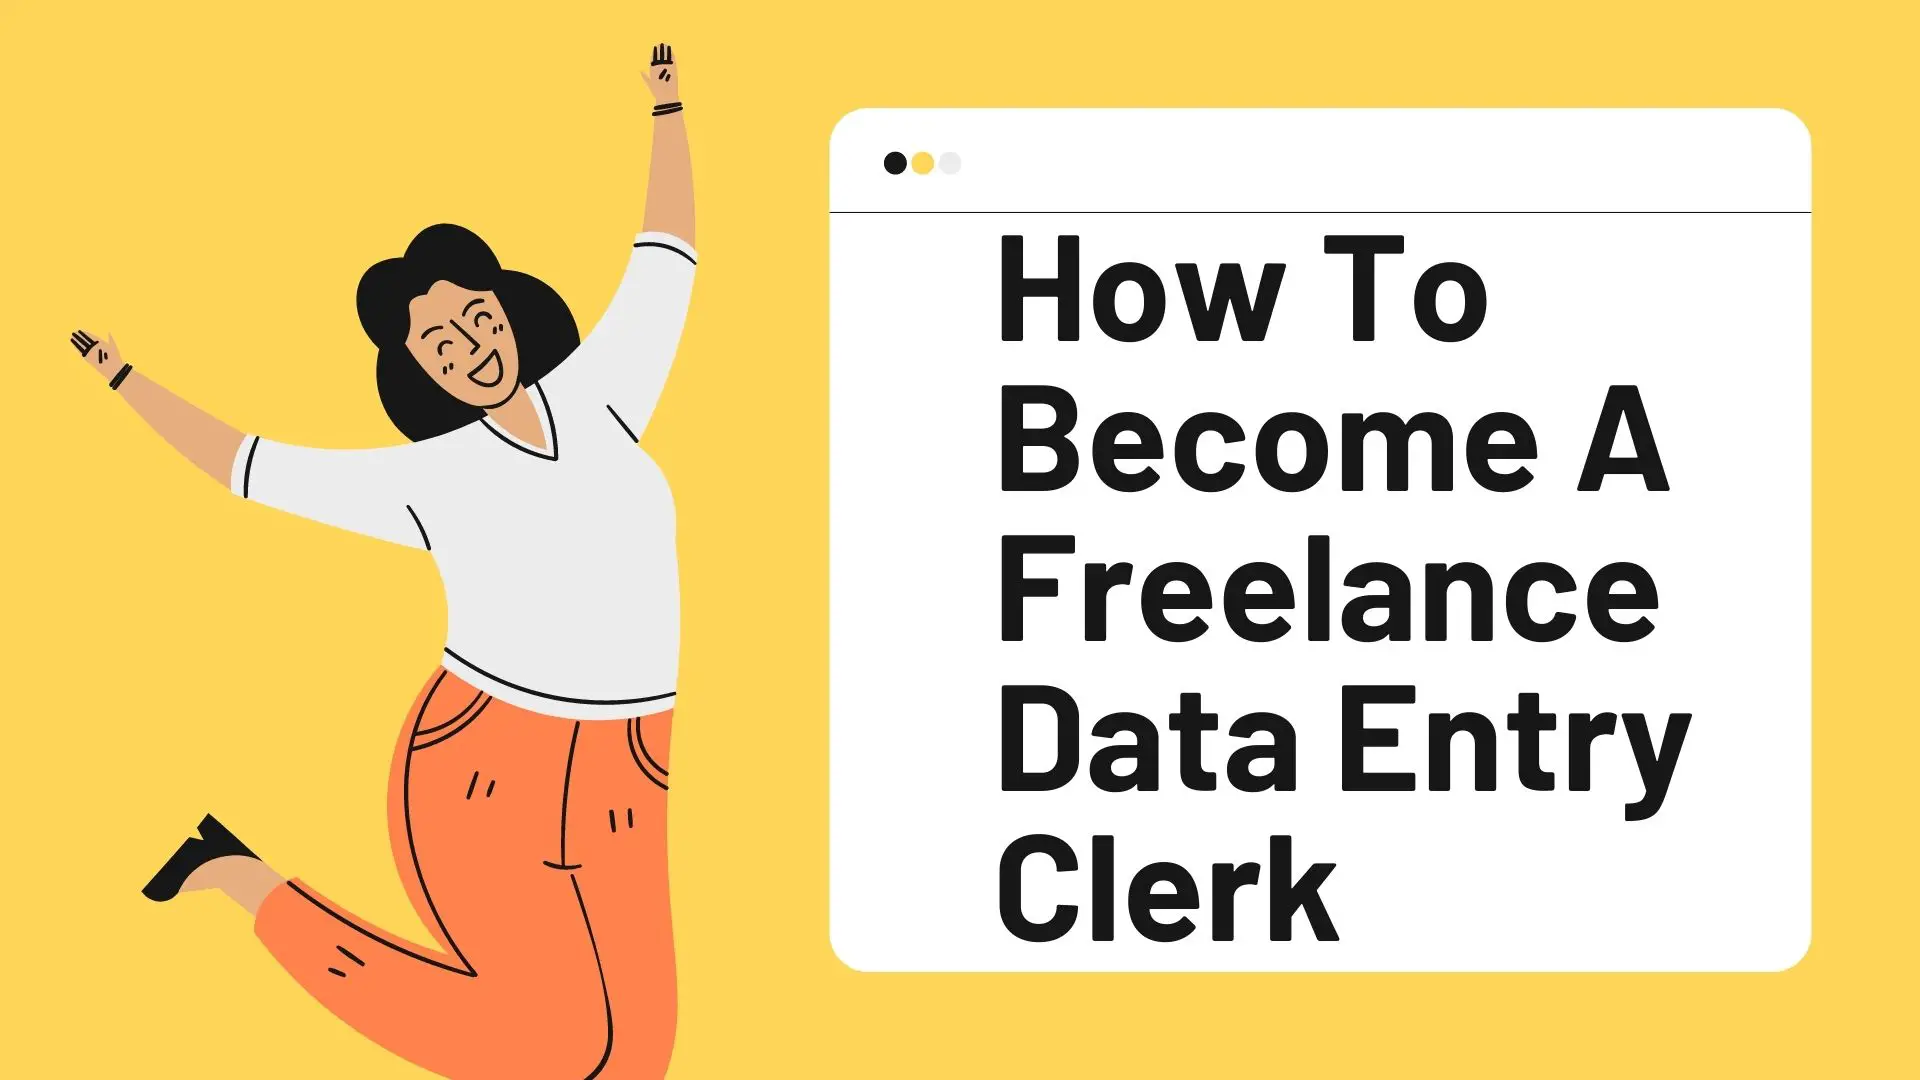 How To Become A Freelance Data Entry Clerk